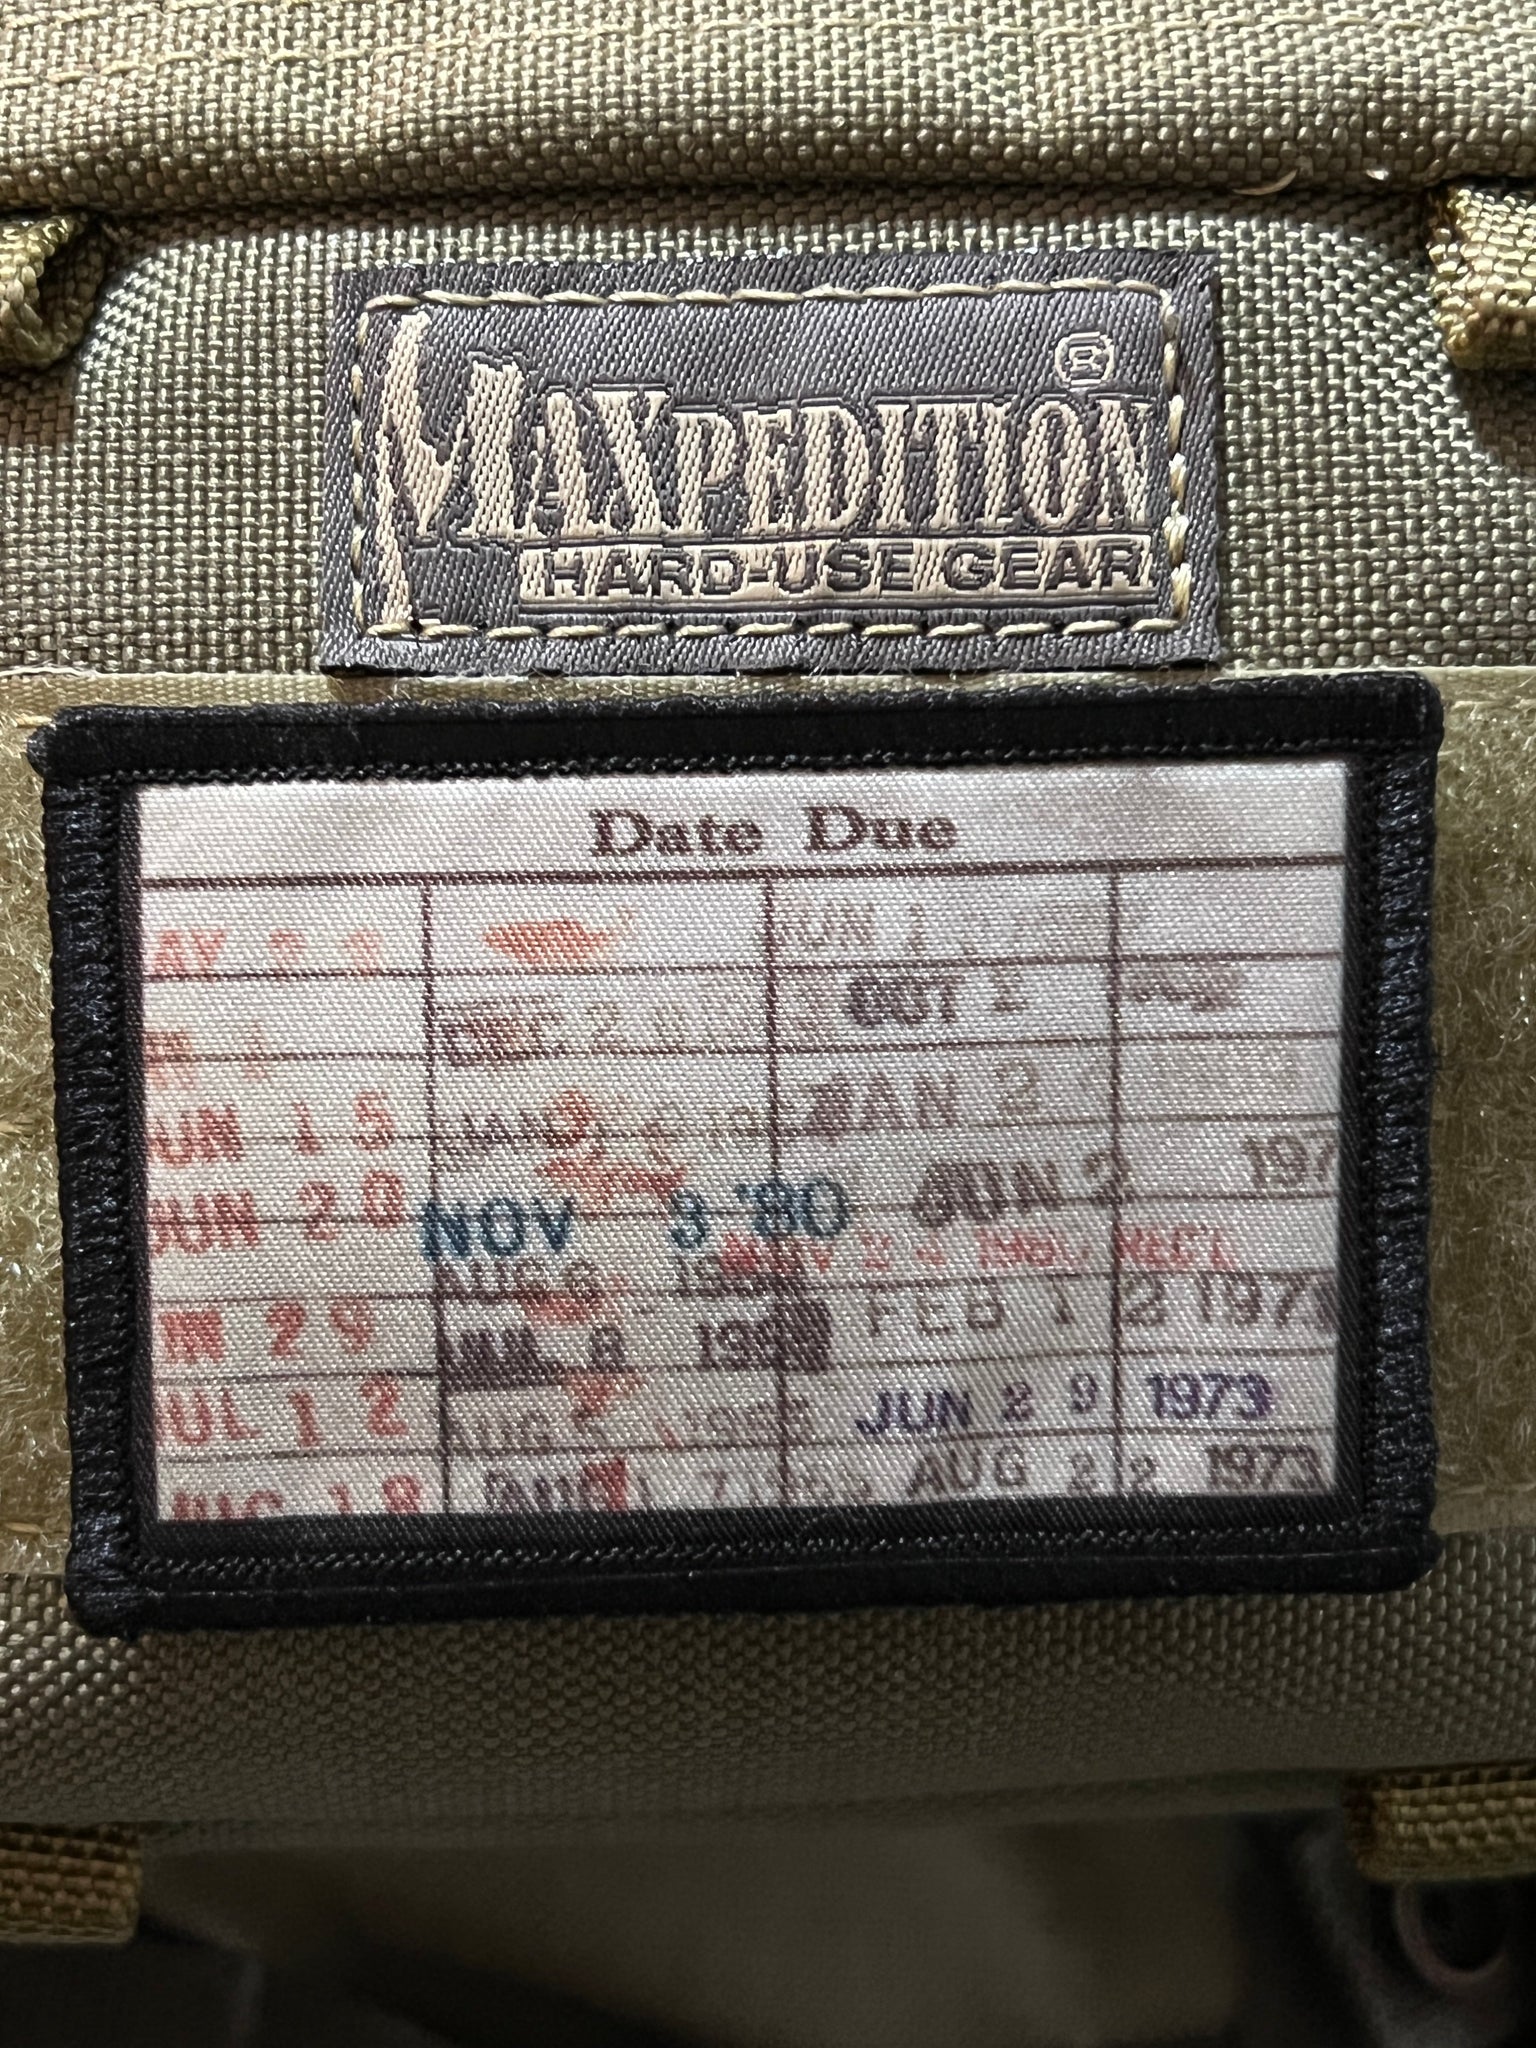 Library Due Dates Card Morale Patch 2x3